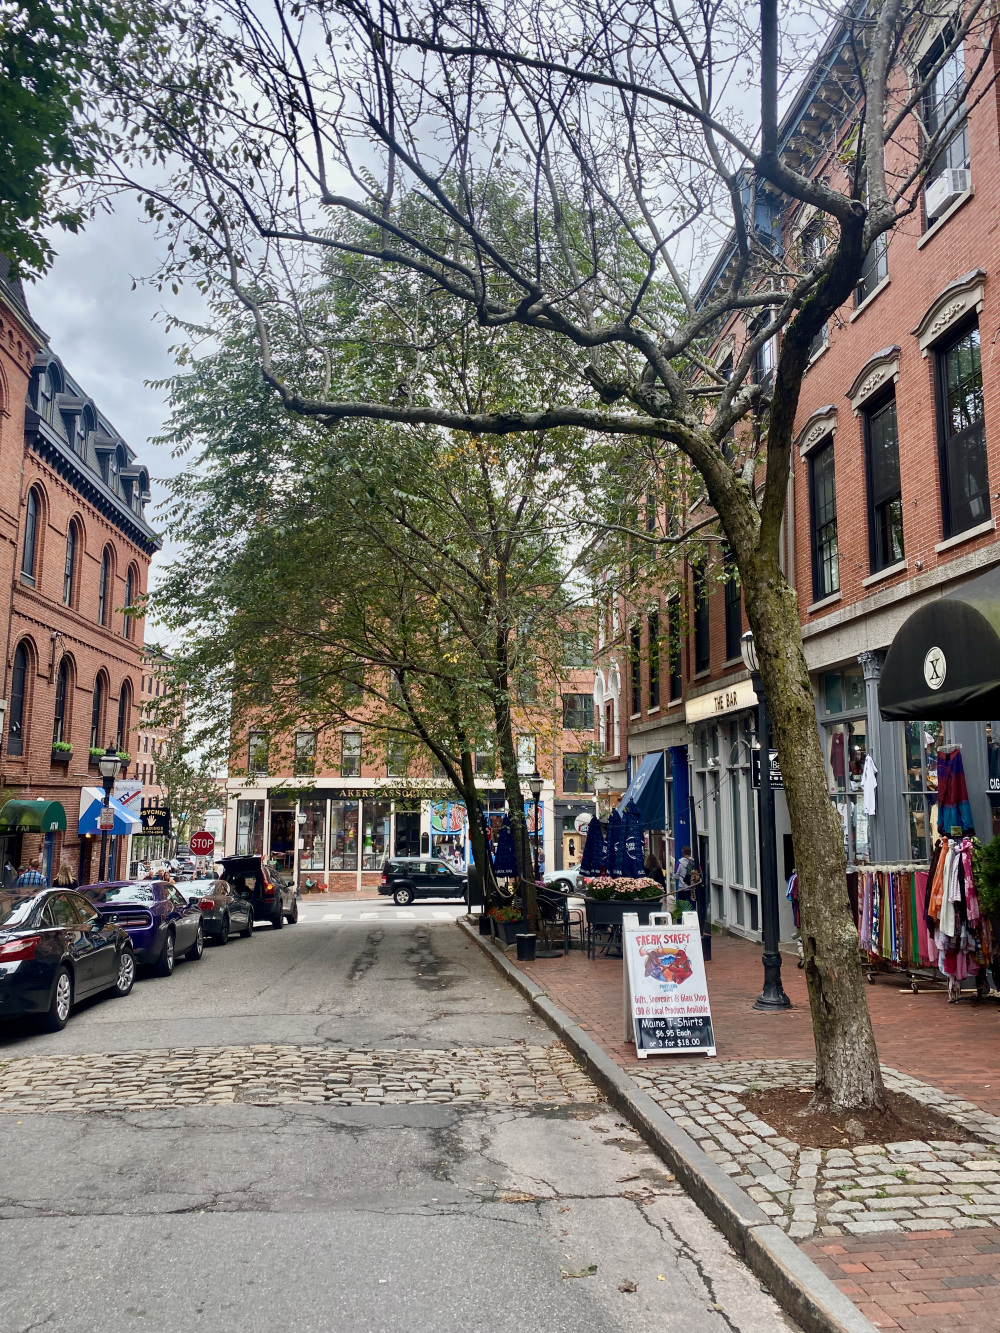 Some of the shopping streets in Portland, Maine